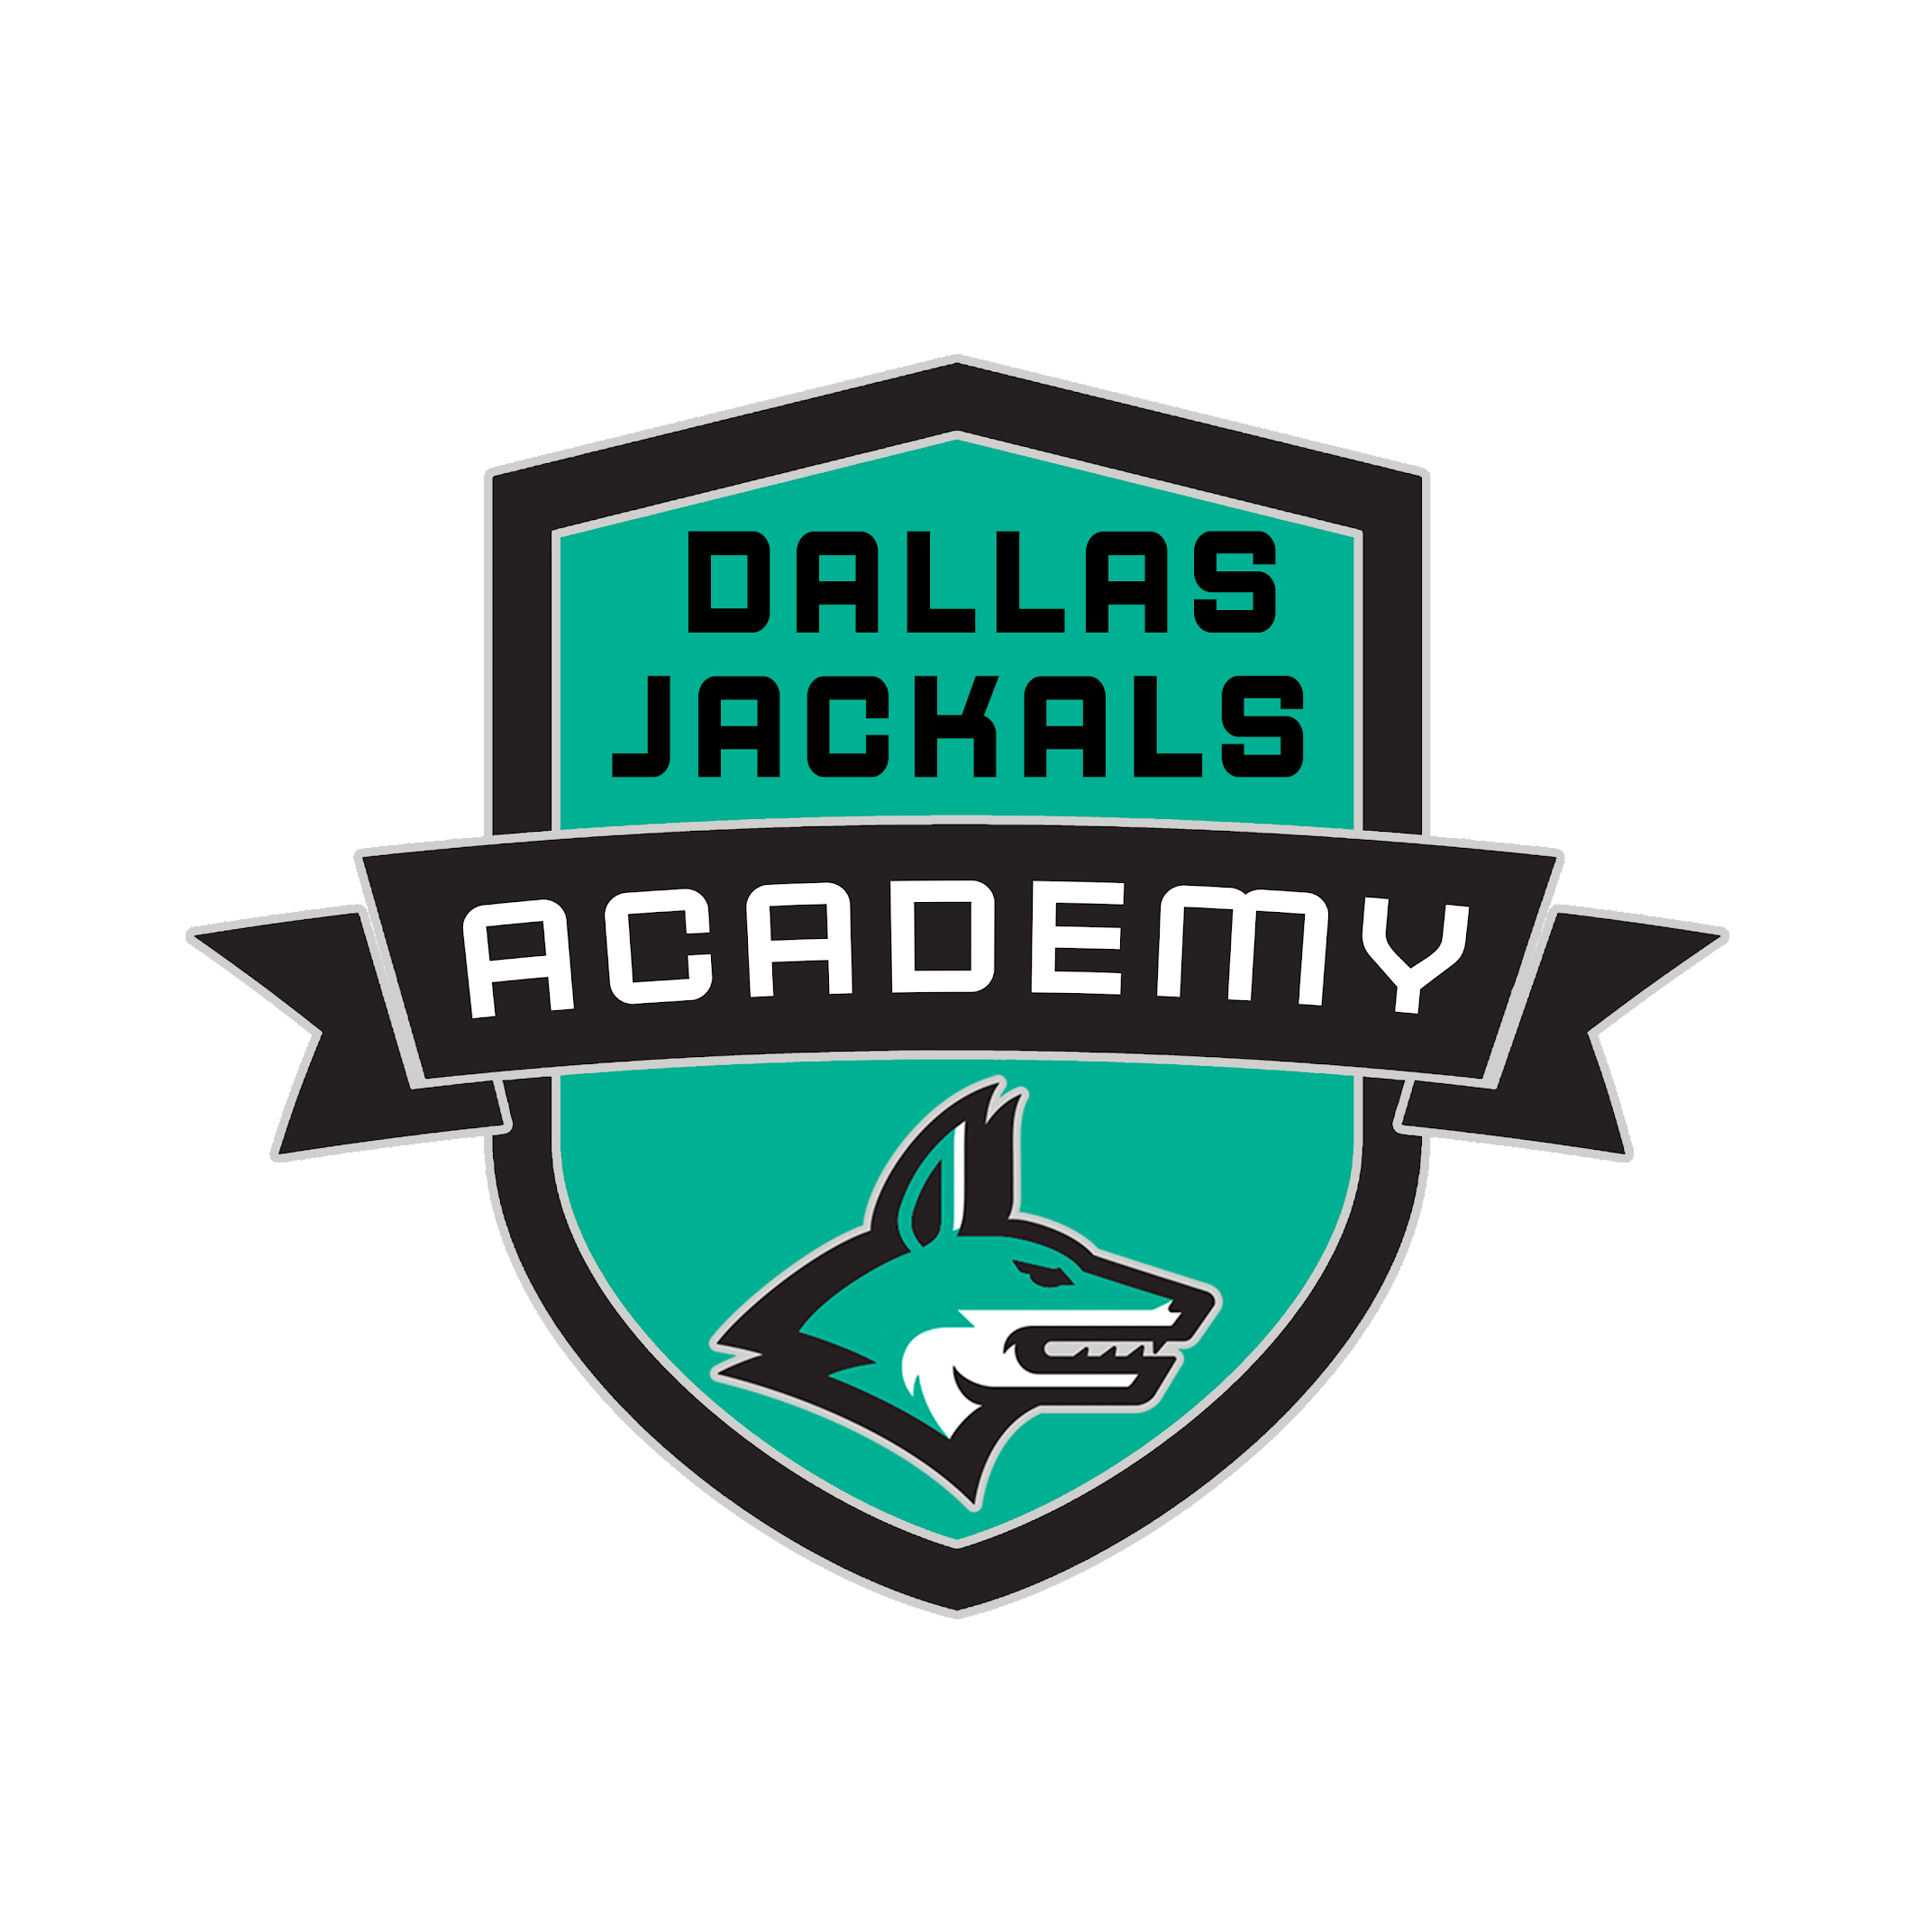 Dallas Jackals Rugby Team Launches Academy